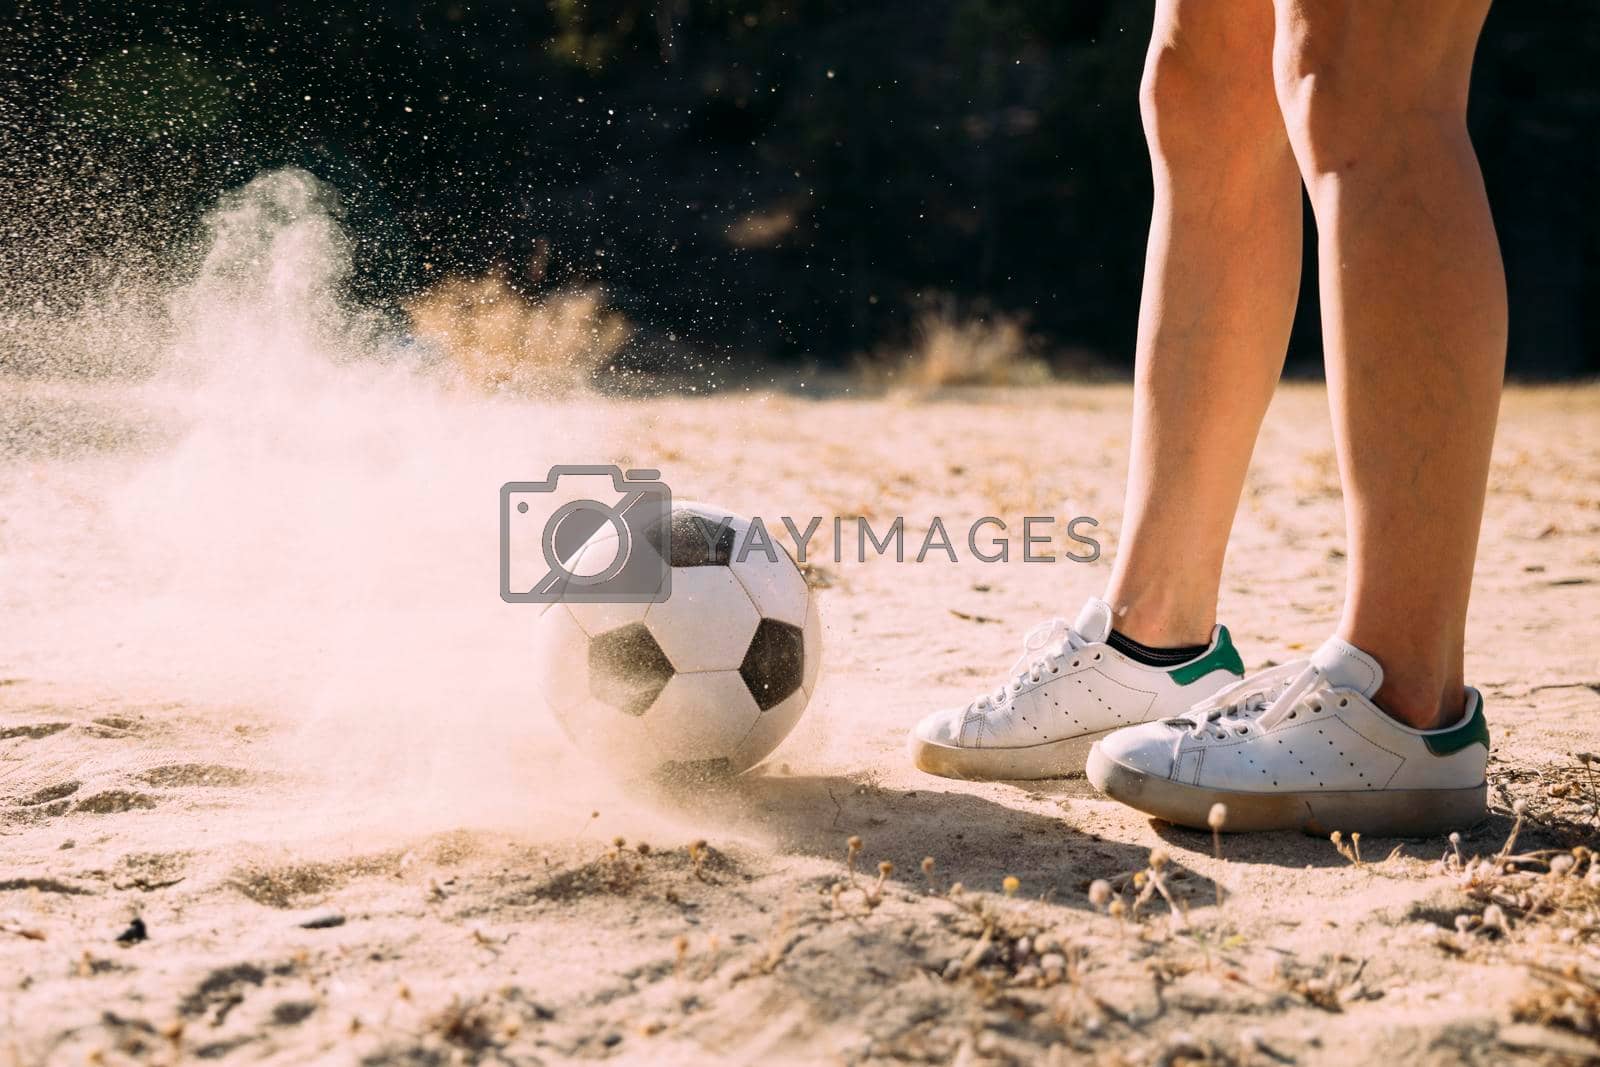 Royalty free image of crop athletic legs standing by football outdoors by Zahard